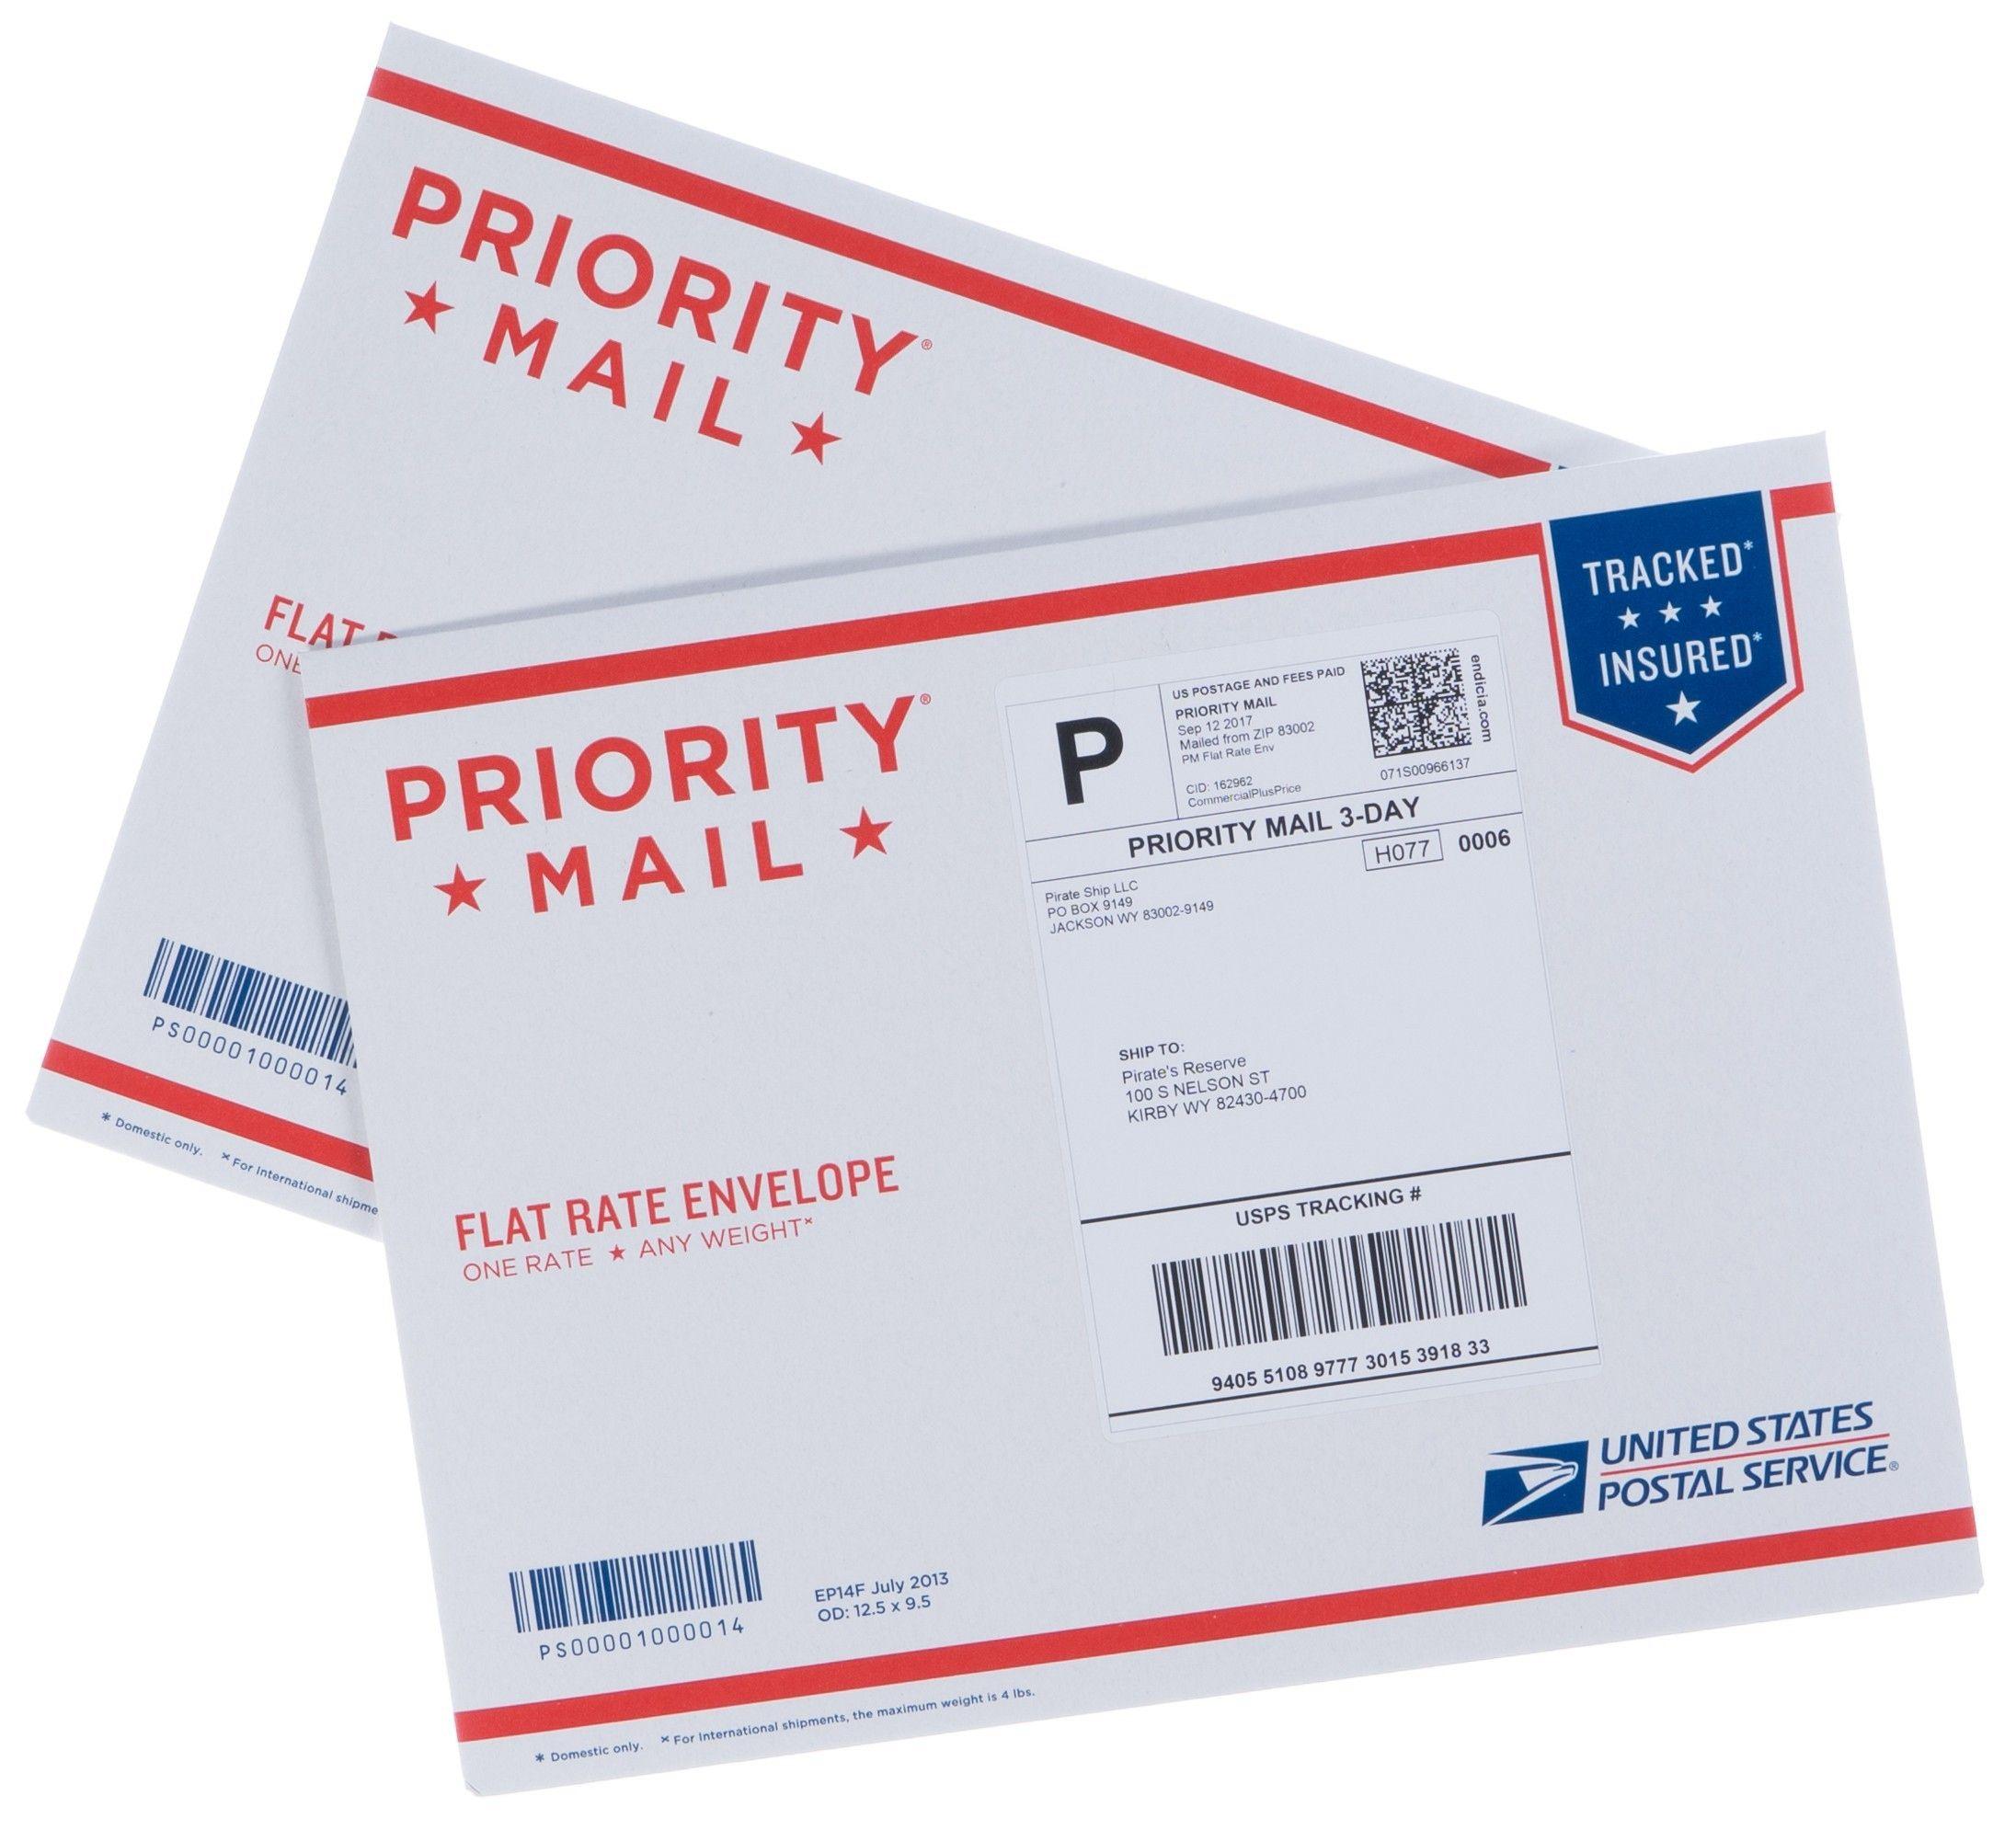 USPS Letterhead Logo - Make Usps Shipping Label Elegant the Cheapest Way to Ship Everything ...